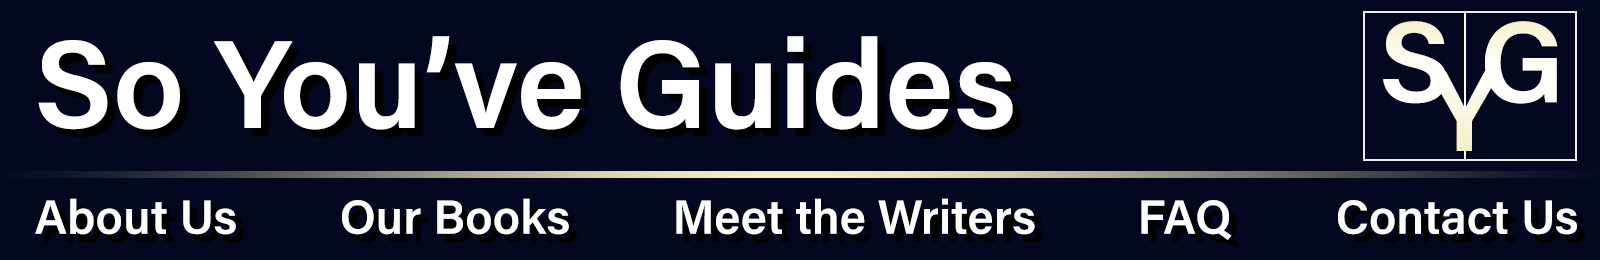 So You've Guides